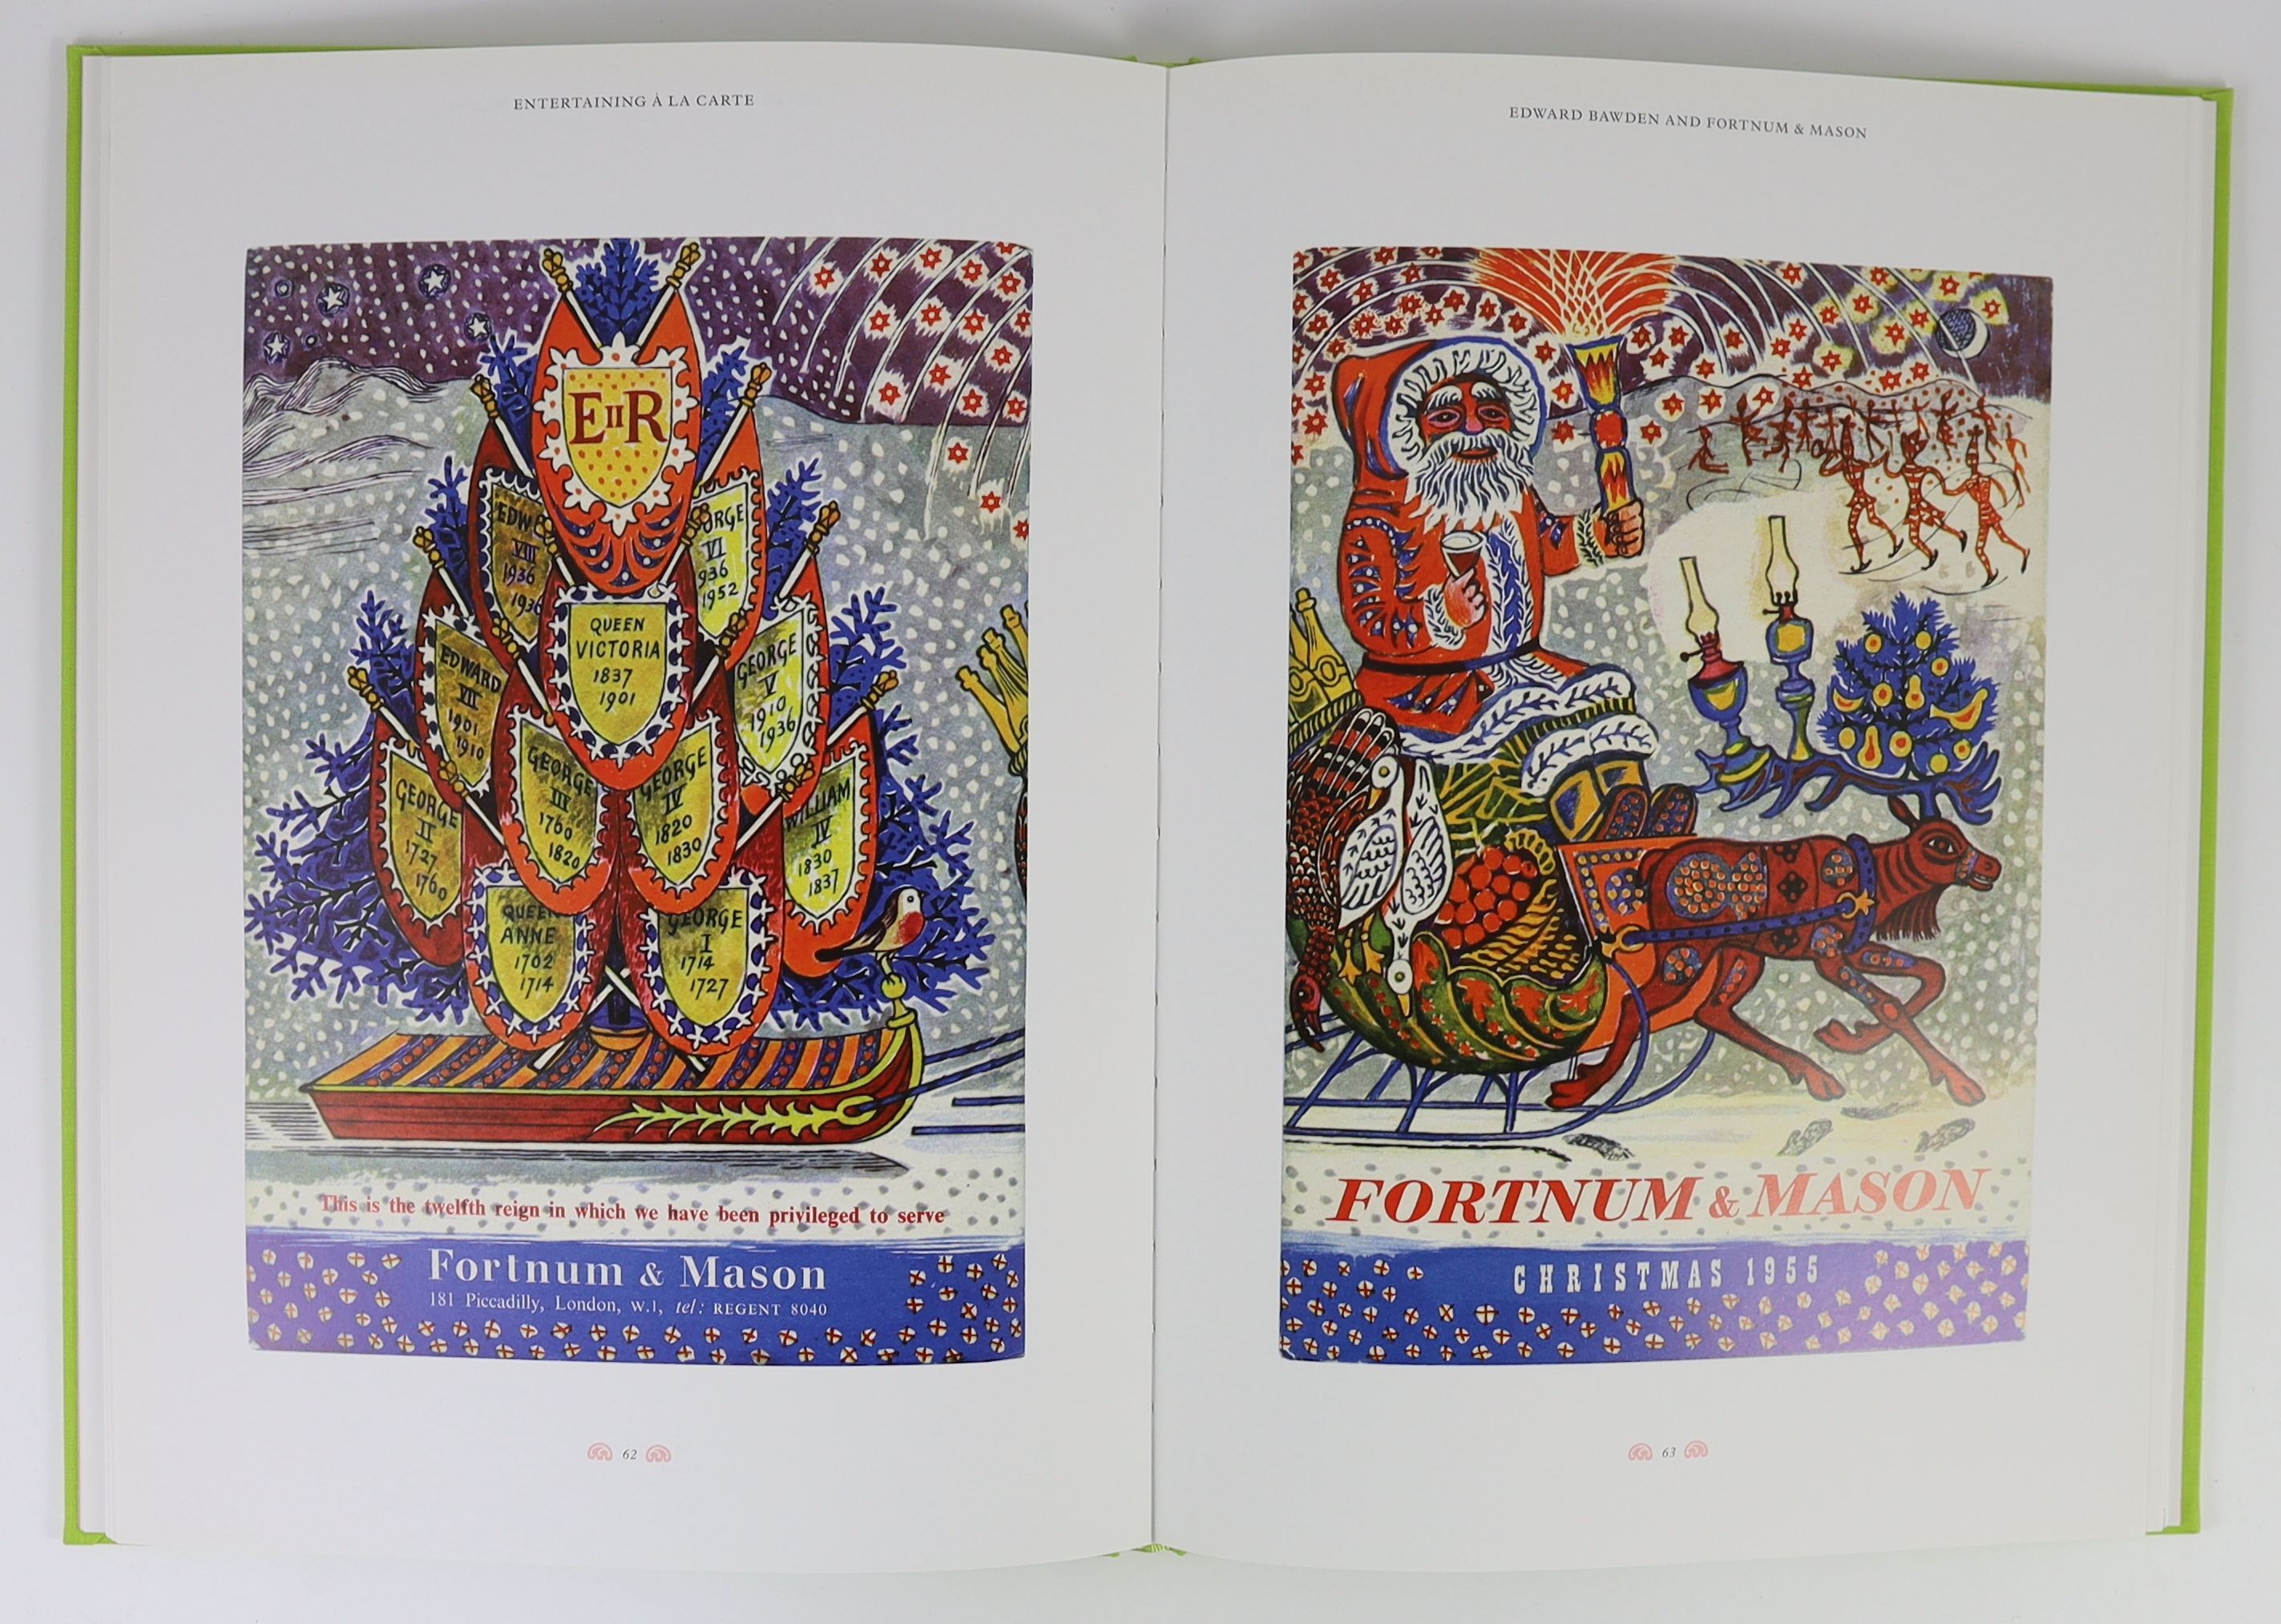 Skipwith, Peyton - Entertaining A’ L Carte - Edward Bawden and Fortnum & Mason, one of 1000, The Mainstone Press, Norwich, 2007 and Greenwood, Jeremy - Edward Bawden editioned prints, one of 450, The Wood Lea Press, Wood